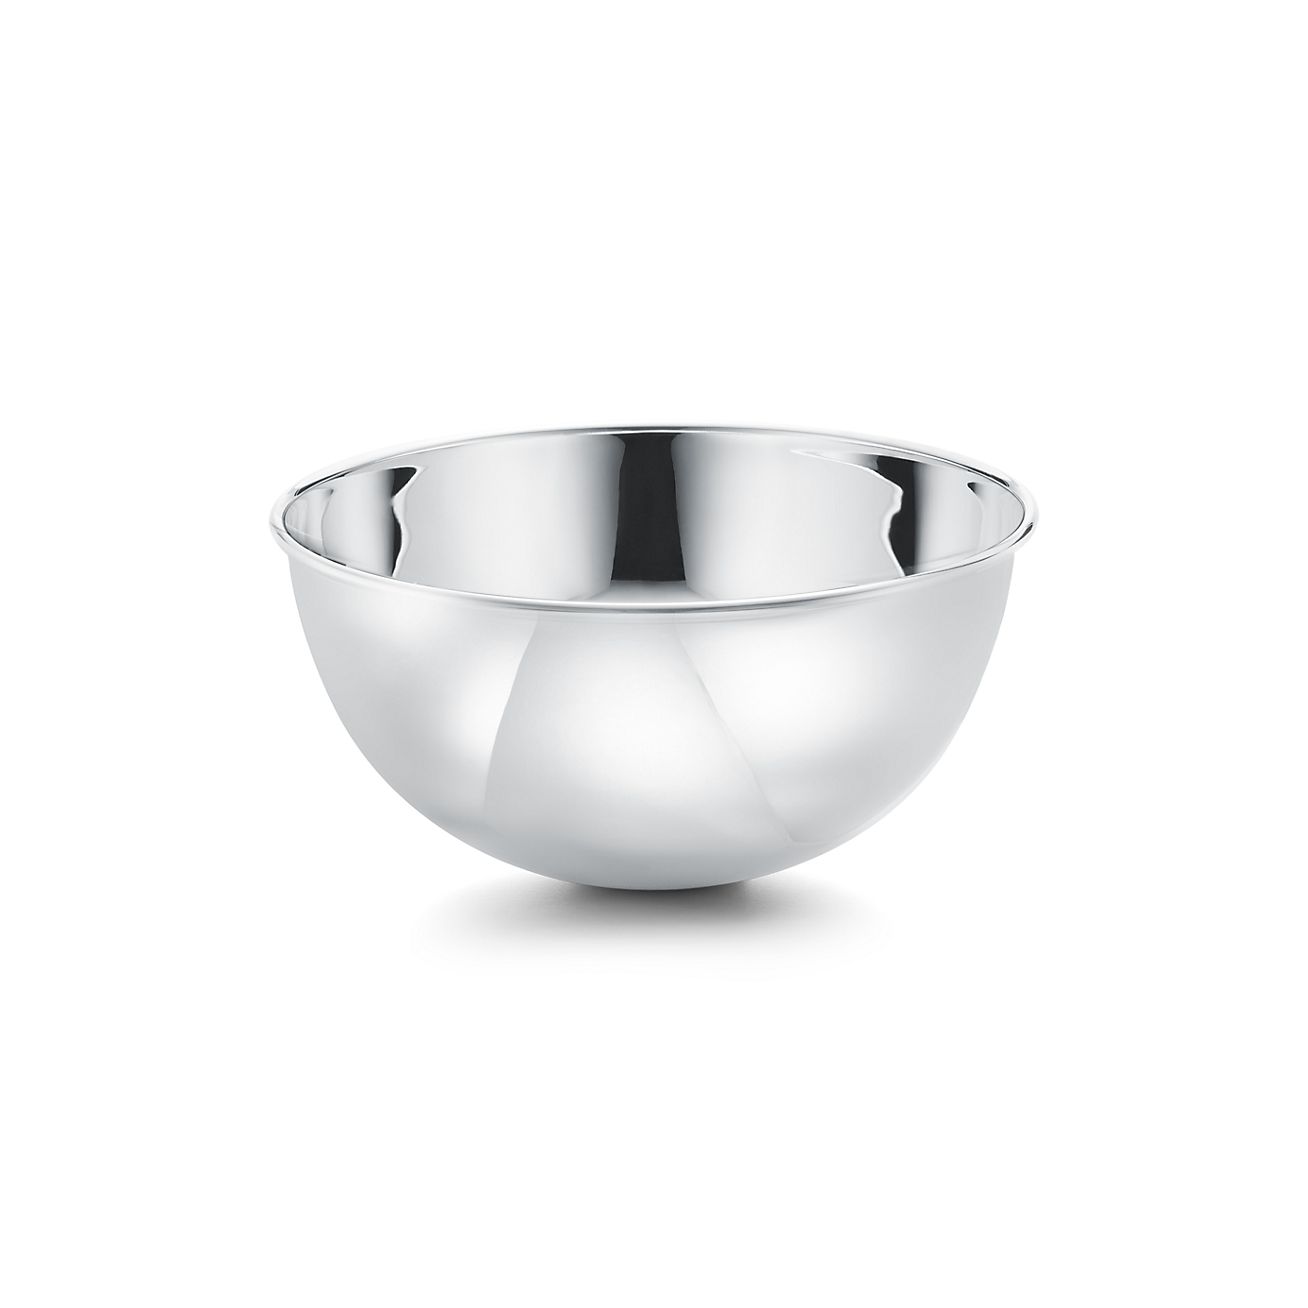 Round bowl in sterling silver, 5 